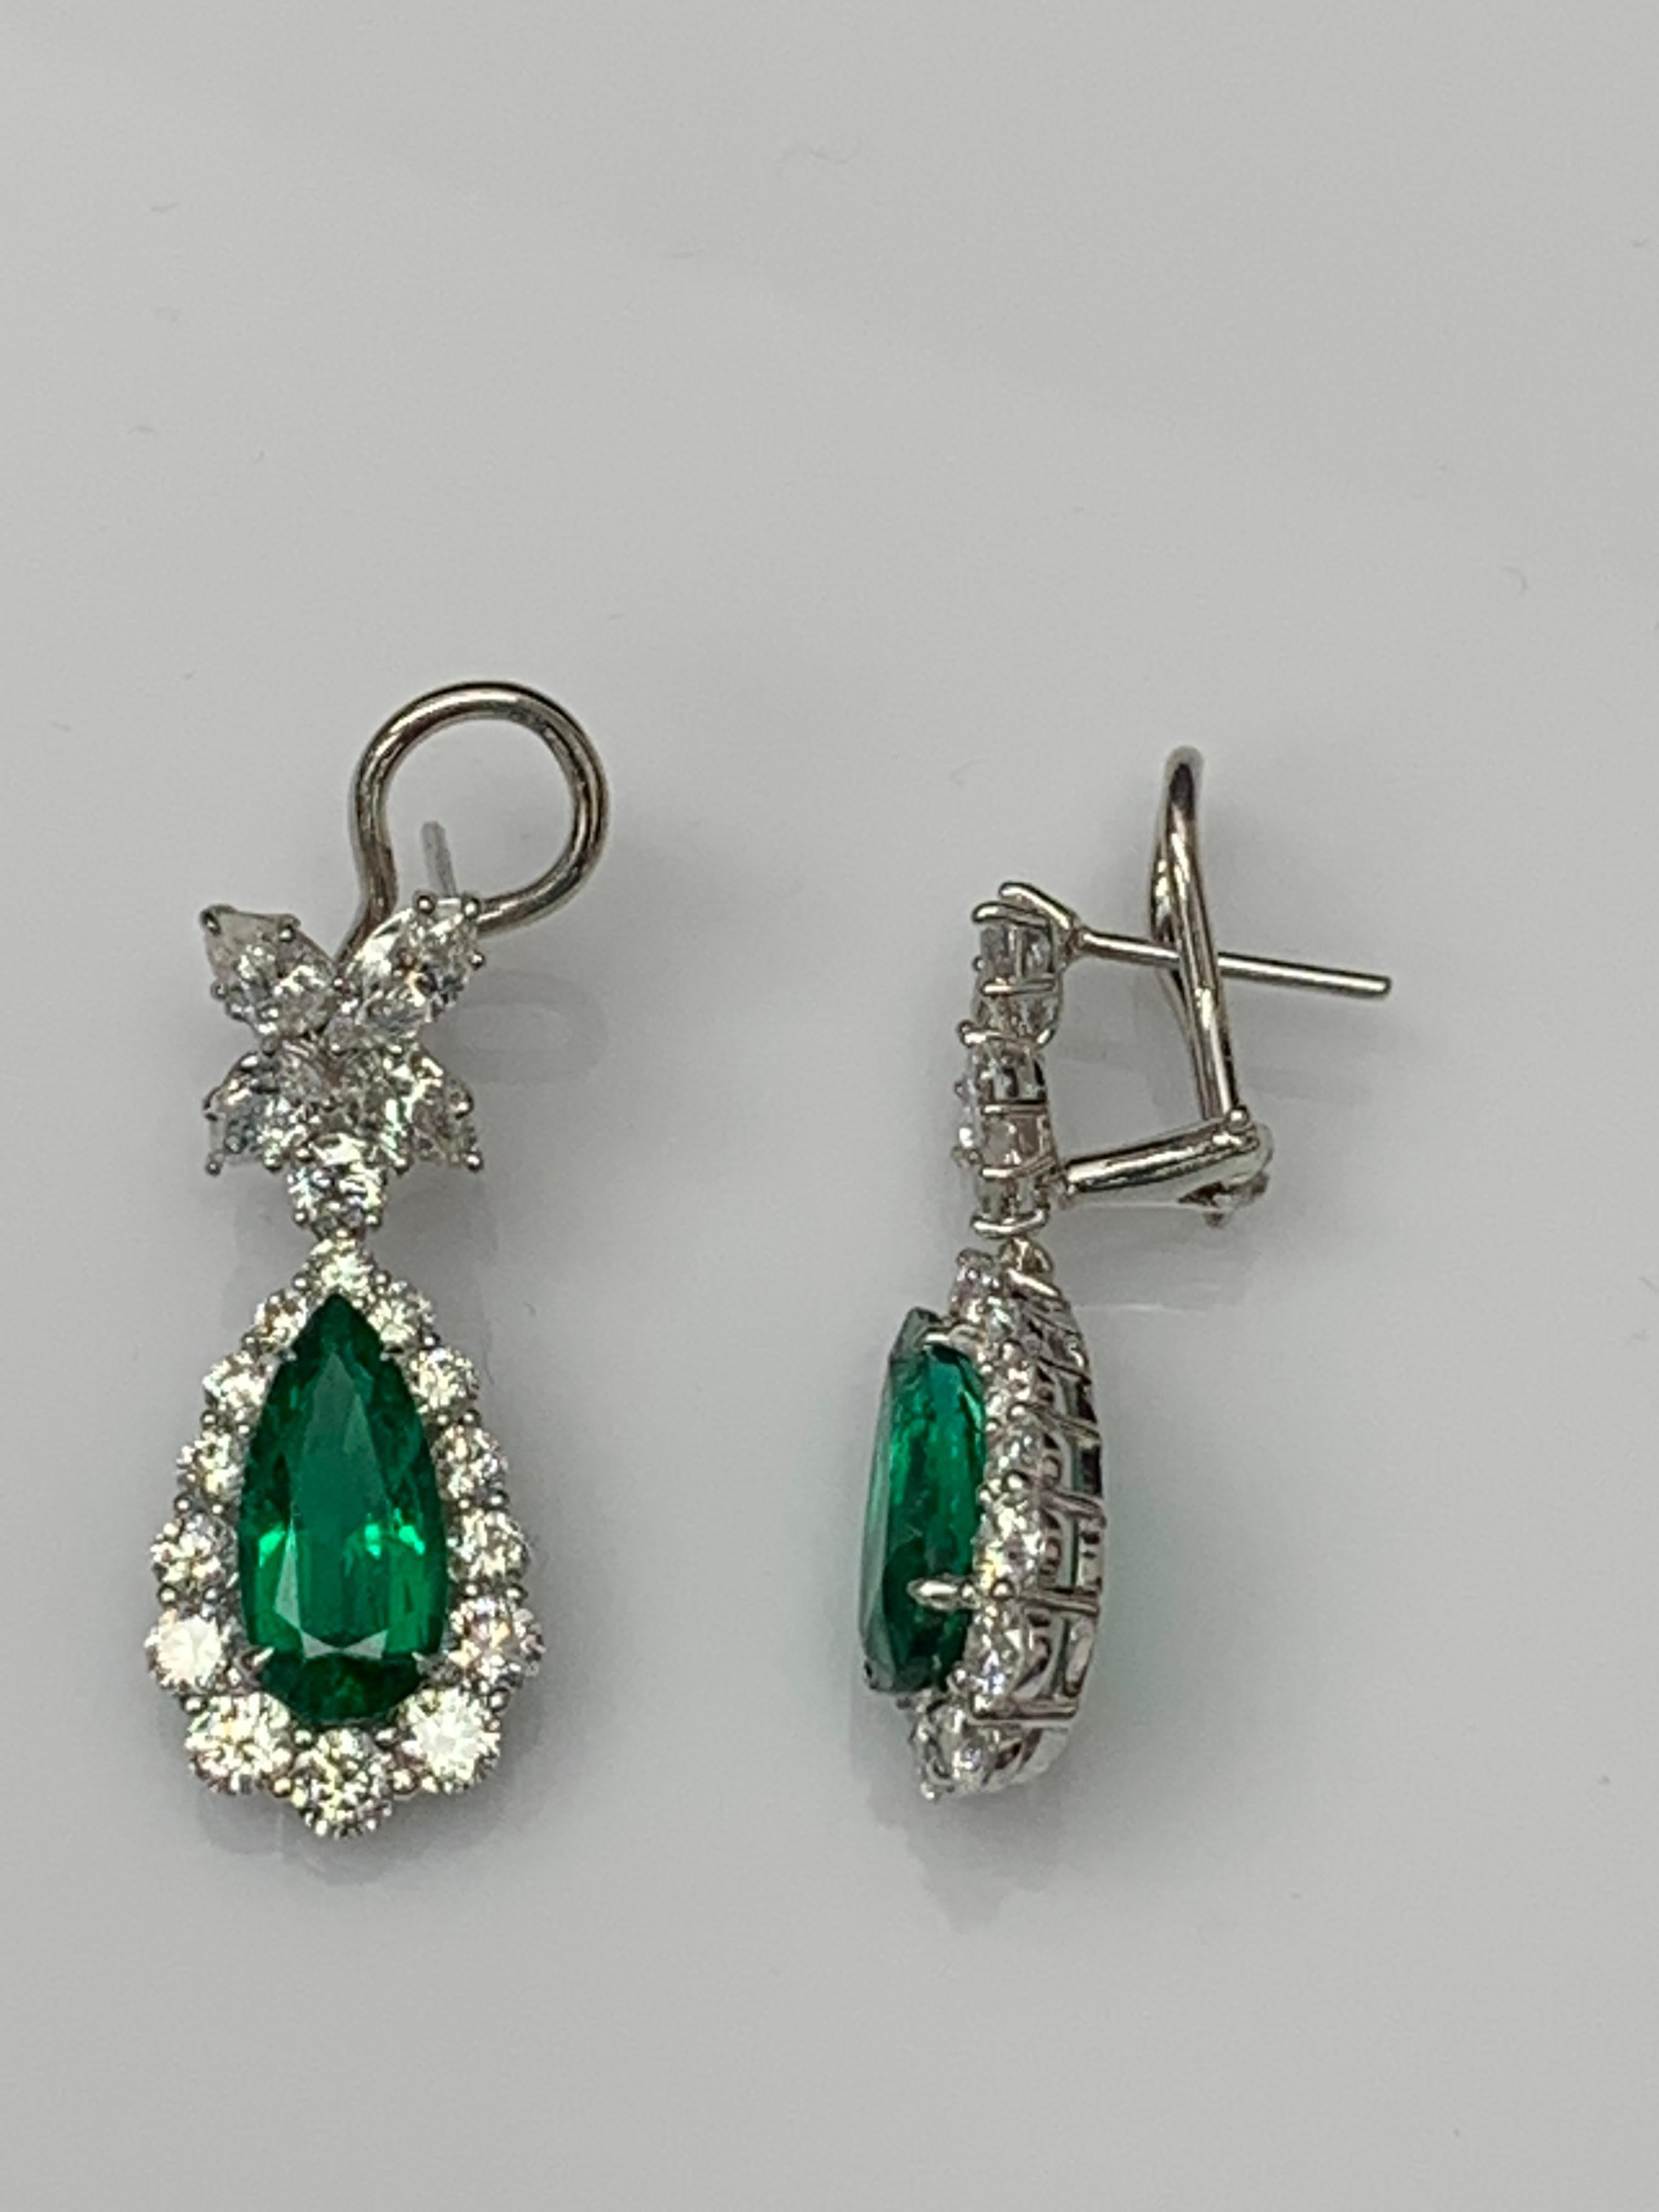 4.80 Carat Pear Shape Emerald and Diamond Drop Earrings in 18K White Gold For Sale 1